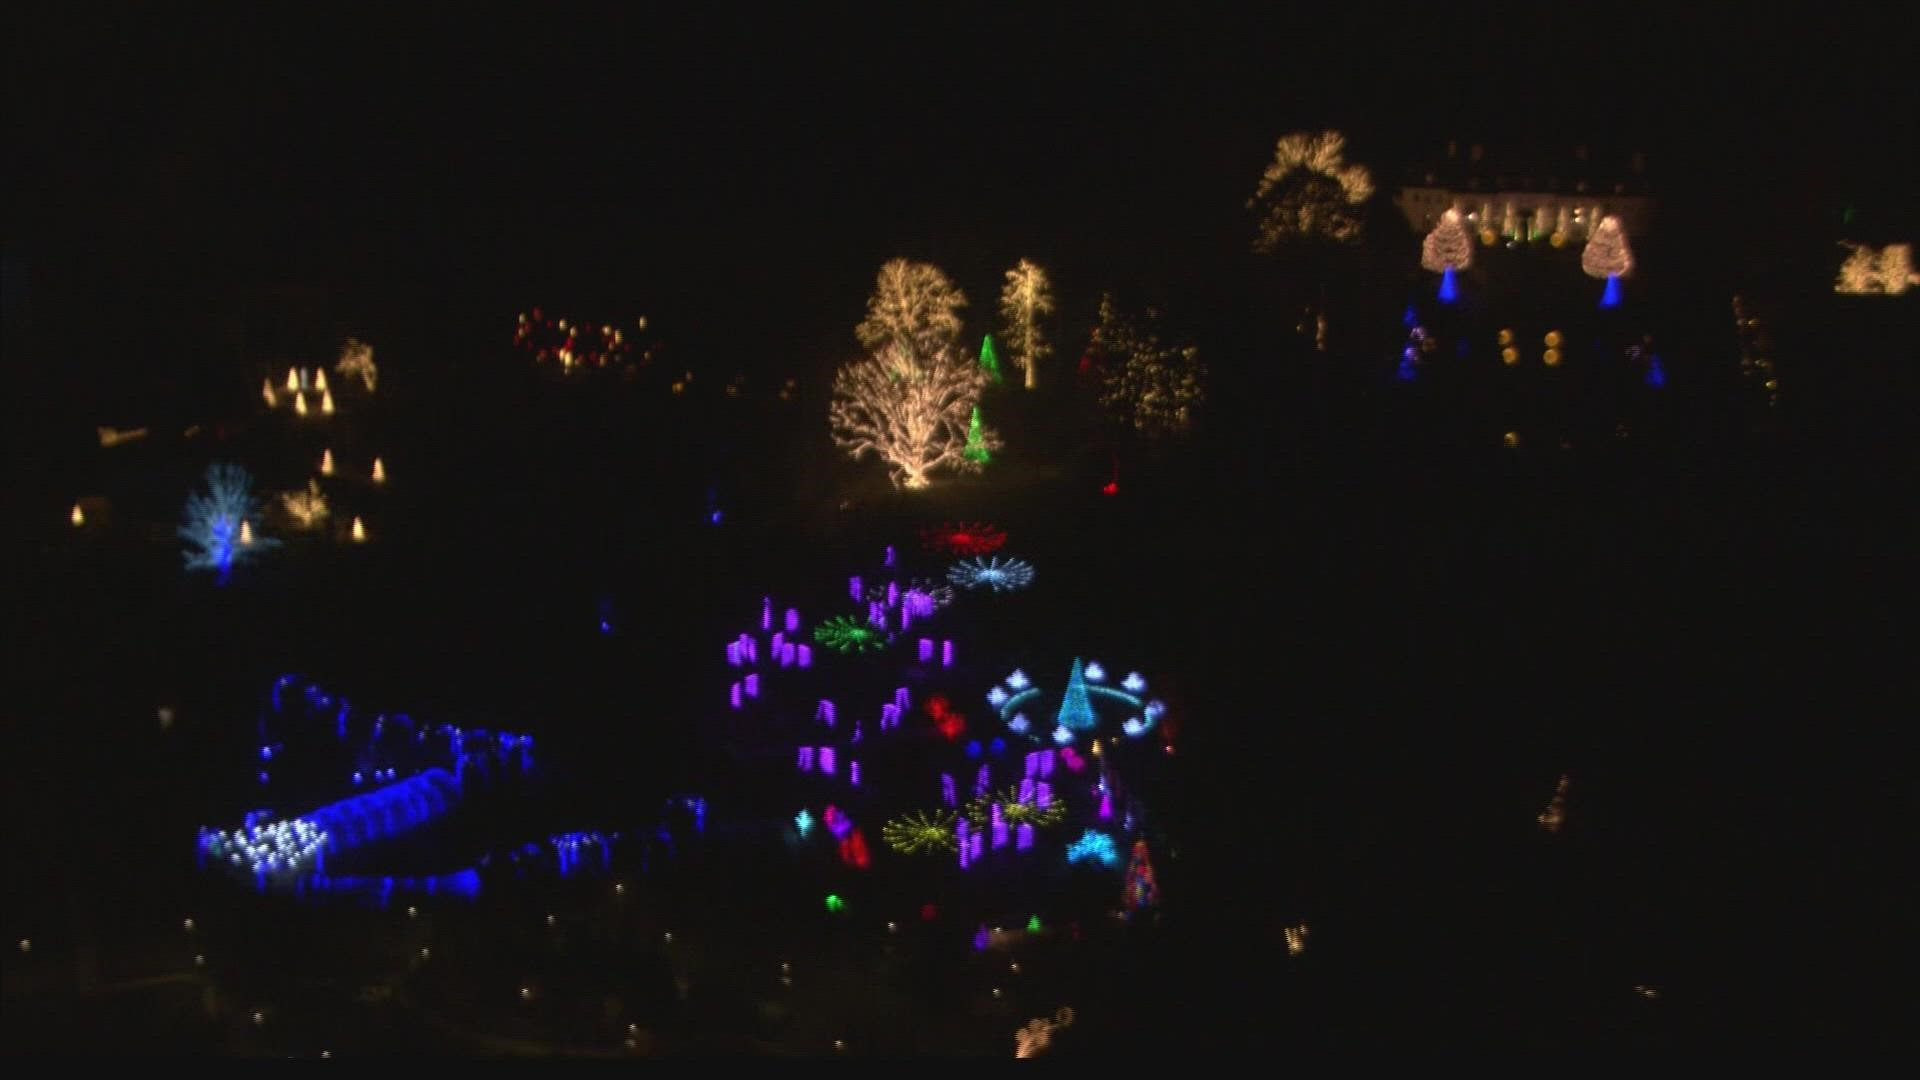 Winterlights features more than 1.5 million lights throughout The Garden at Newfields.